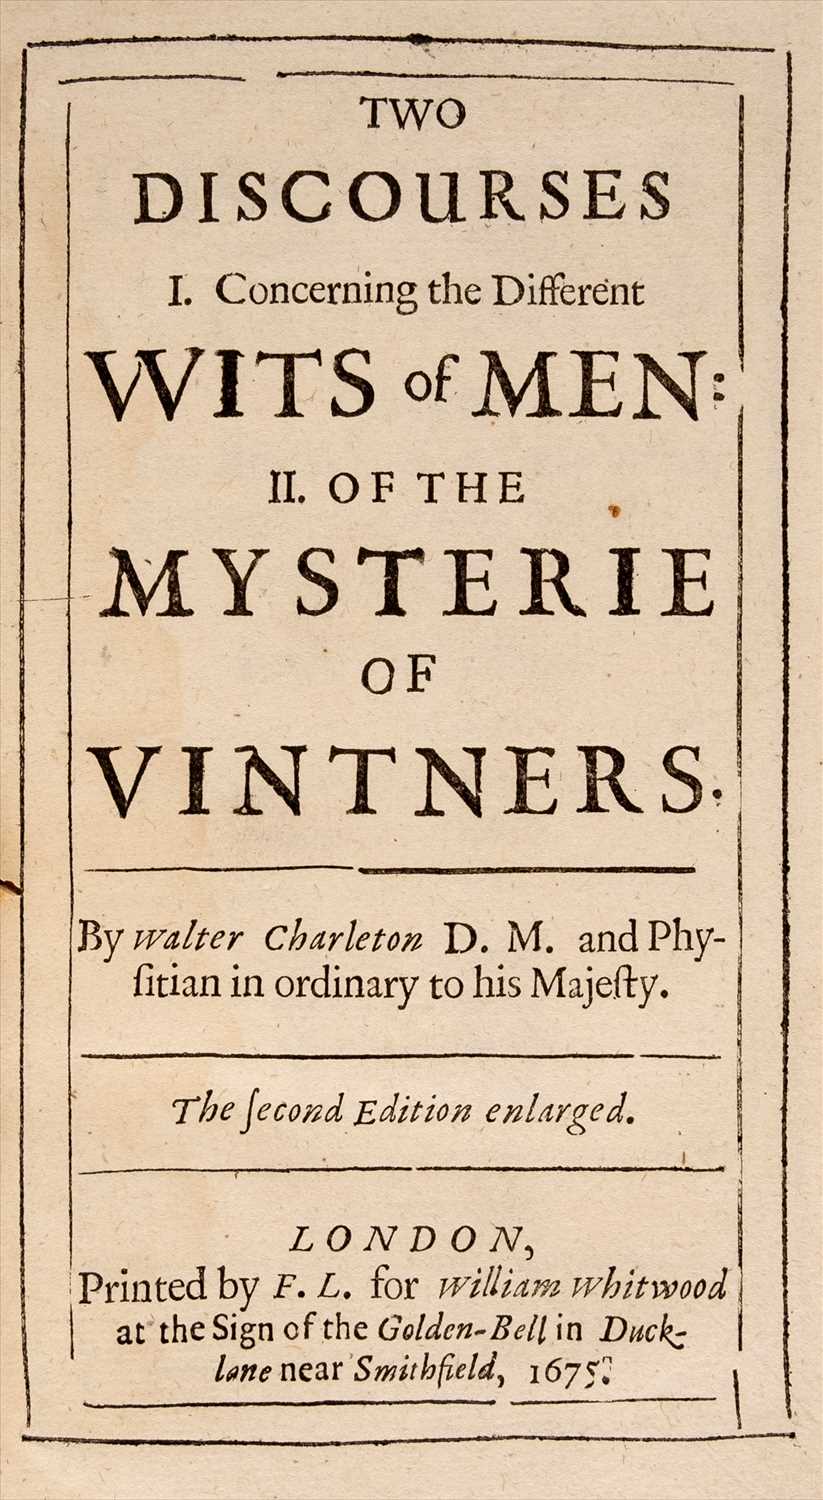 Lot 91 - Charleton (Walter). Two Discourses. ... II Of the Mysterie of Vintners, 2nd edition, 1675